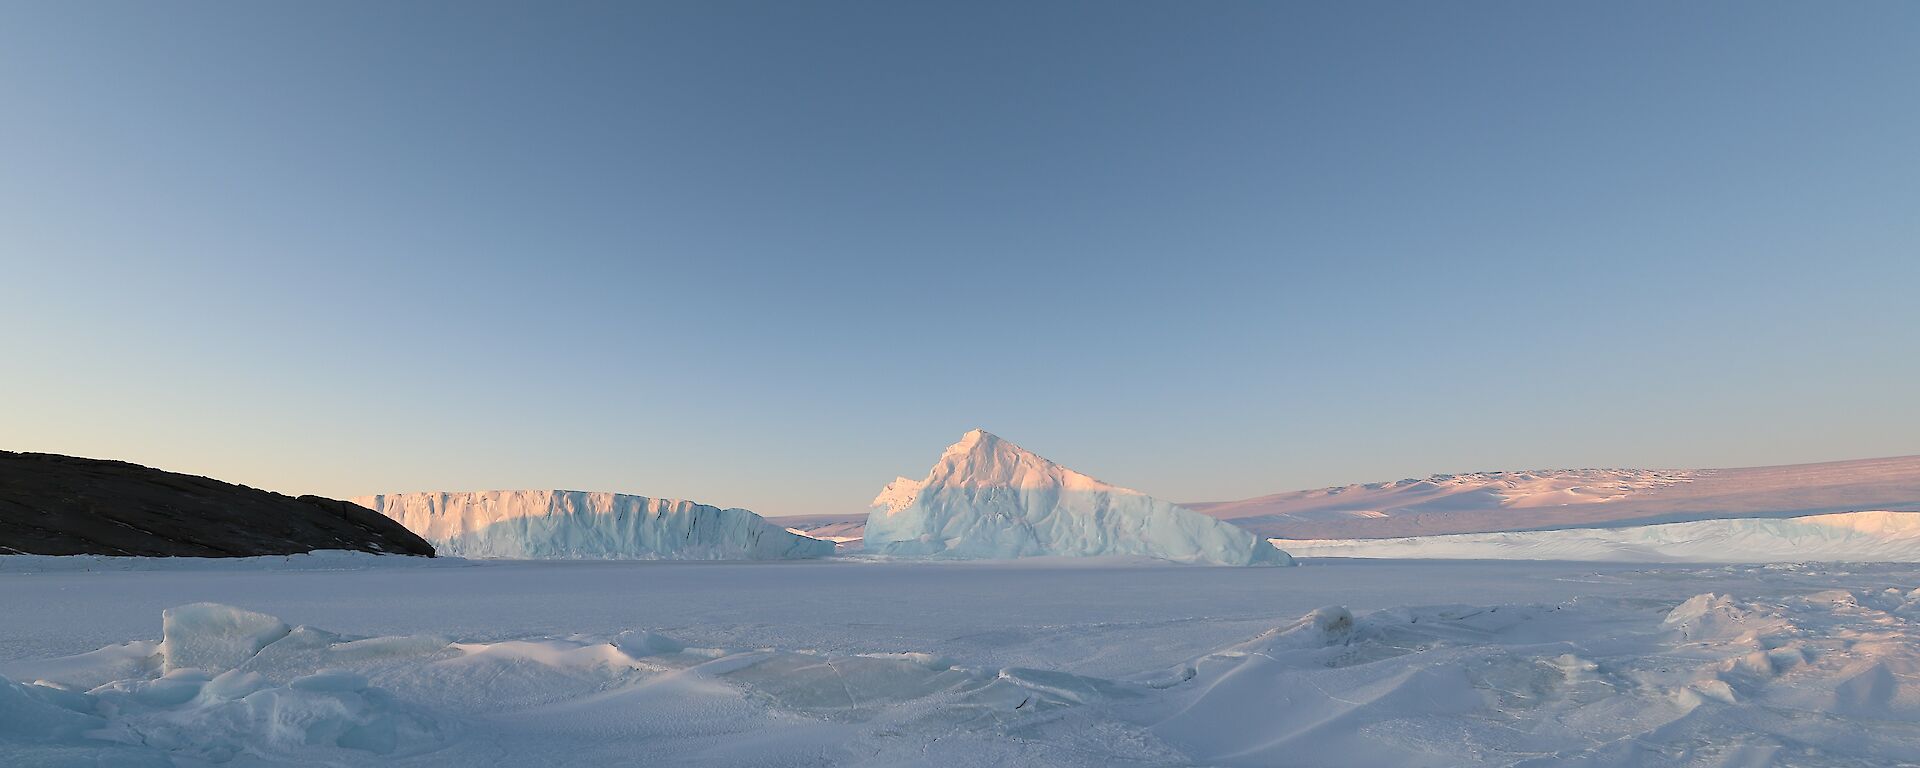 The tips of 2 icebergs reflect the sun. There is a rocky island to the left of frame and an ice-plateau rising in the distance.